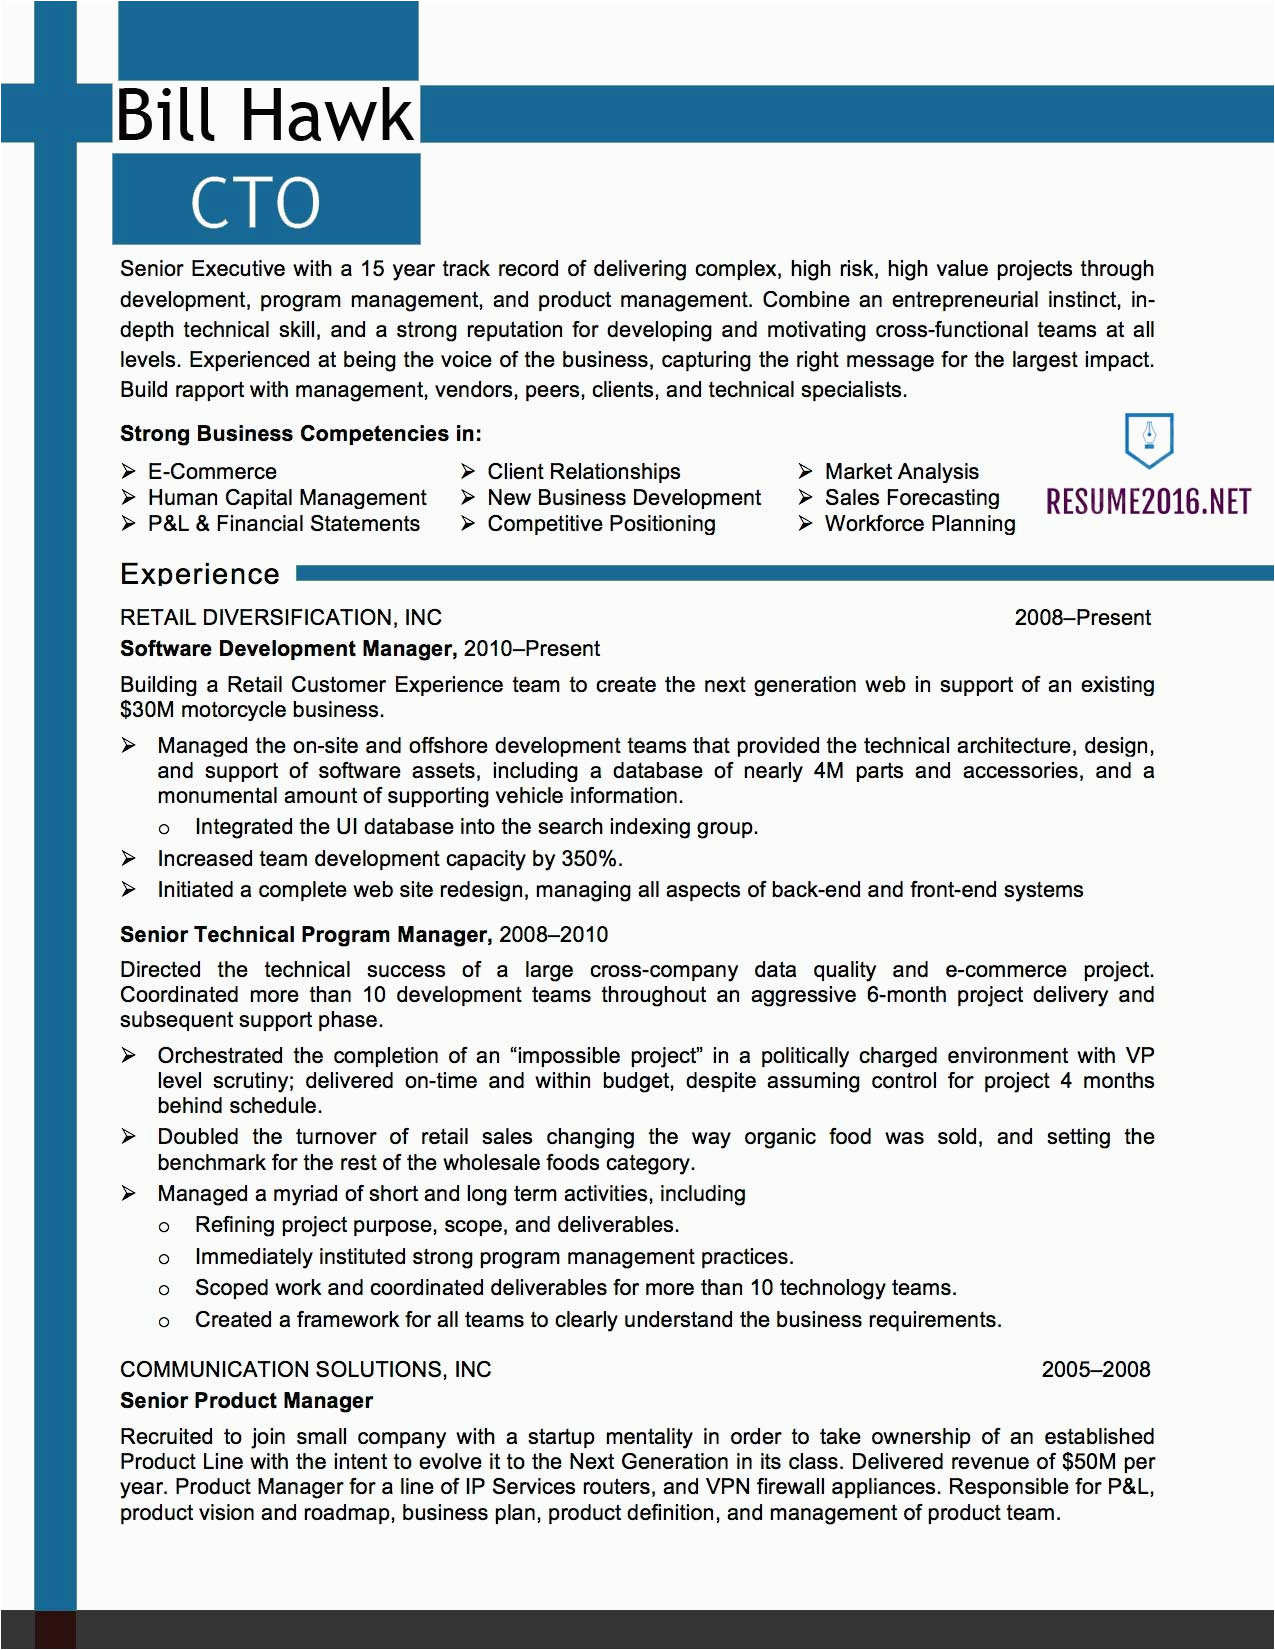 It Professional Resume Examples and Samples It Resume Samples 2016 Cto